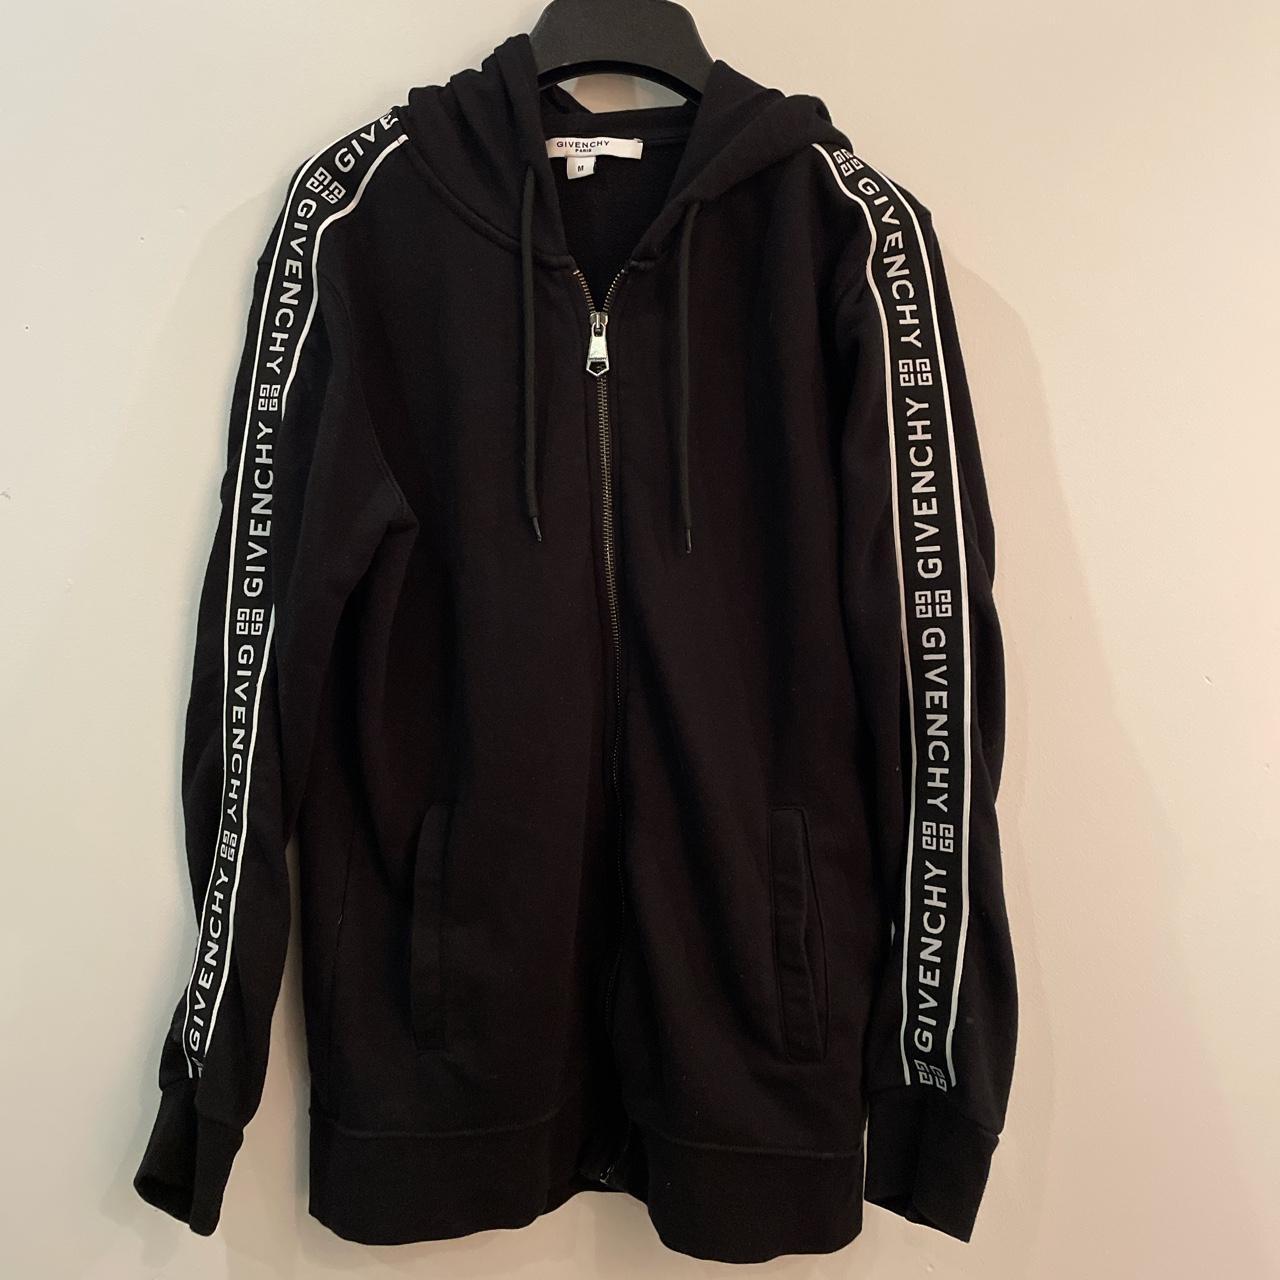 GIVENCHY zip hoodie 💎 9/10 no faults or flairs... - Depop